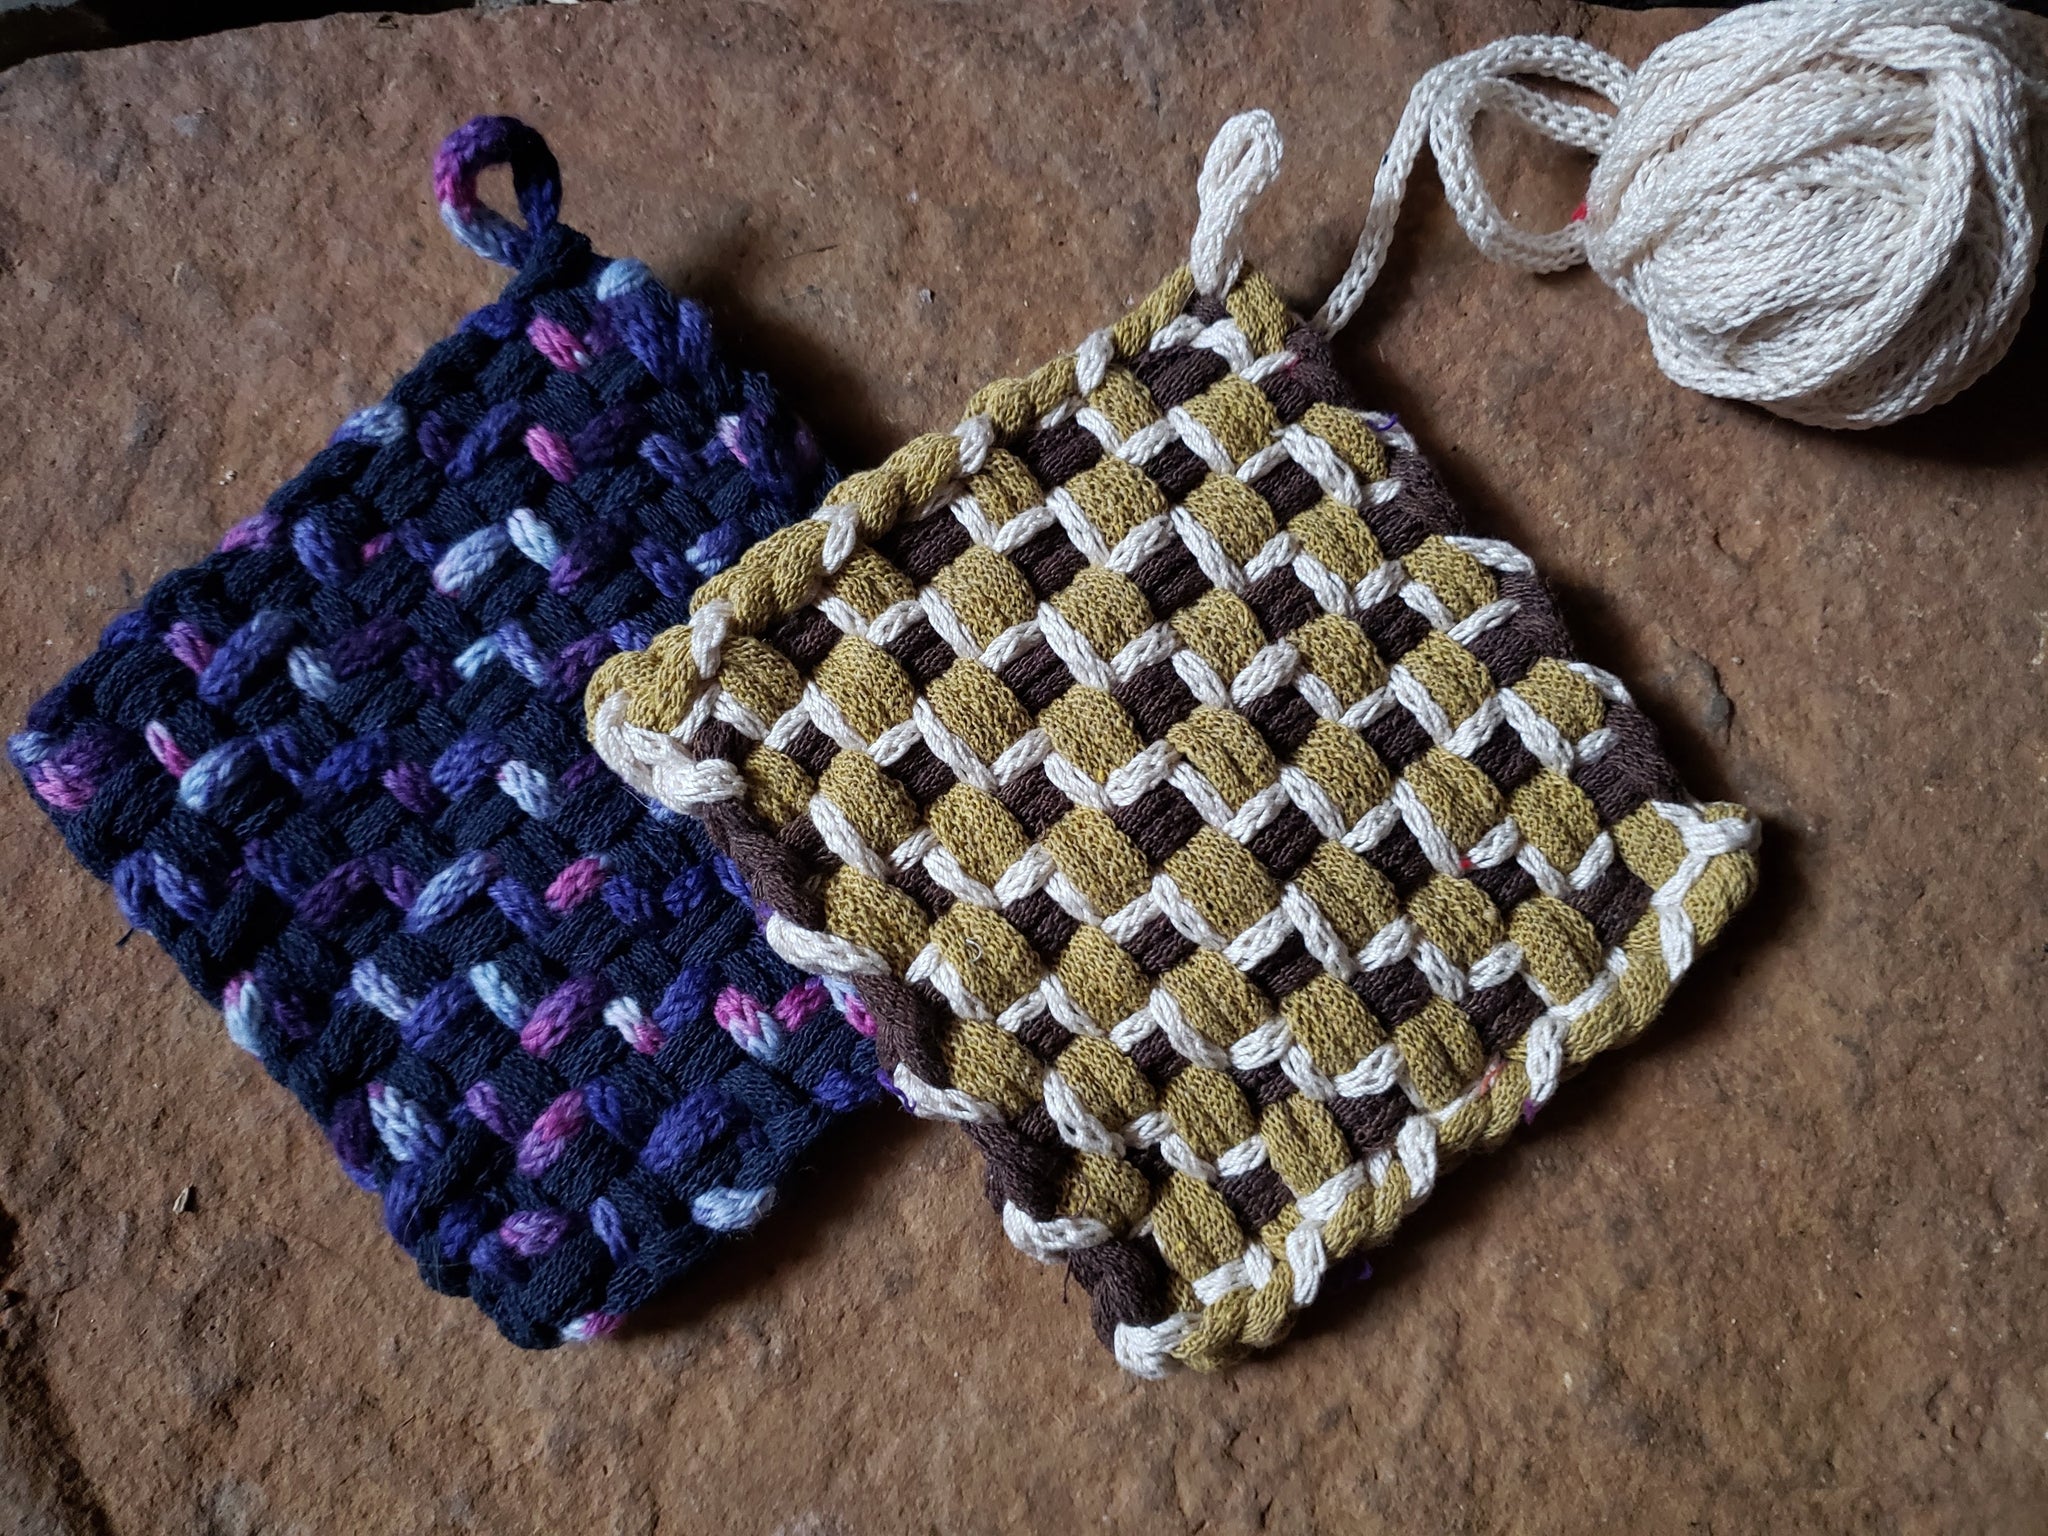 Workshop Recording DUO - Creating and using I-cord for potholder weaving - with Linda Lutomski